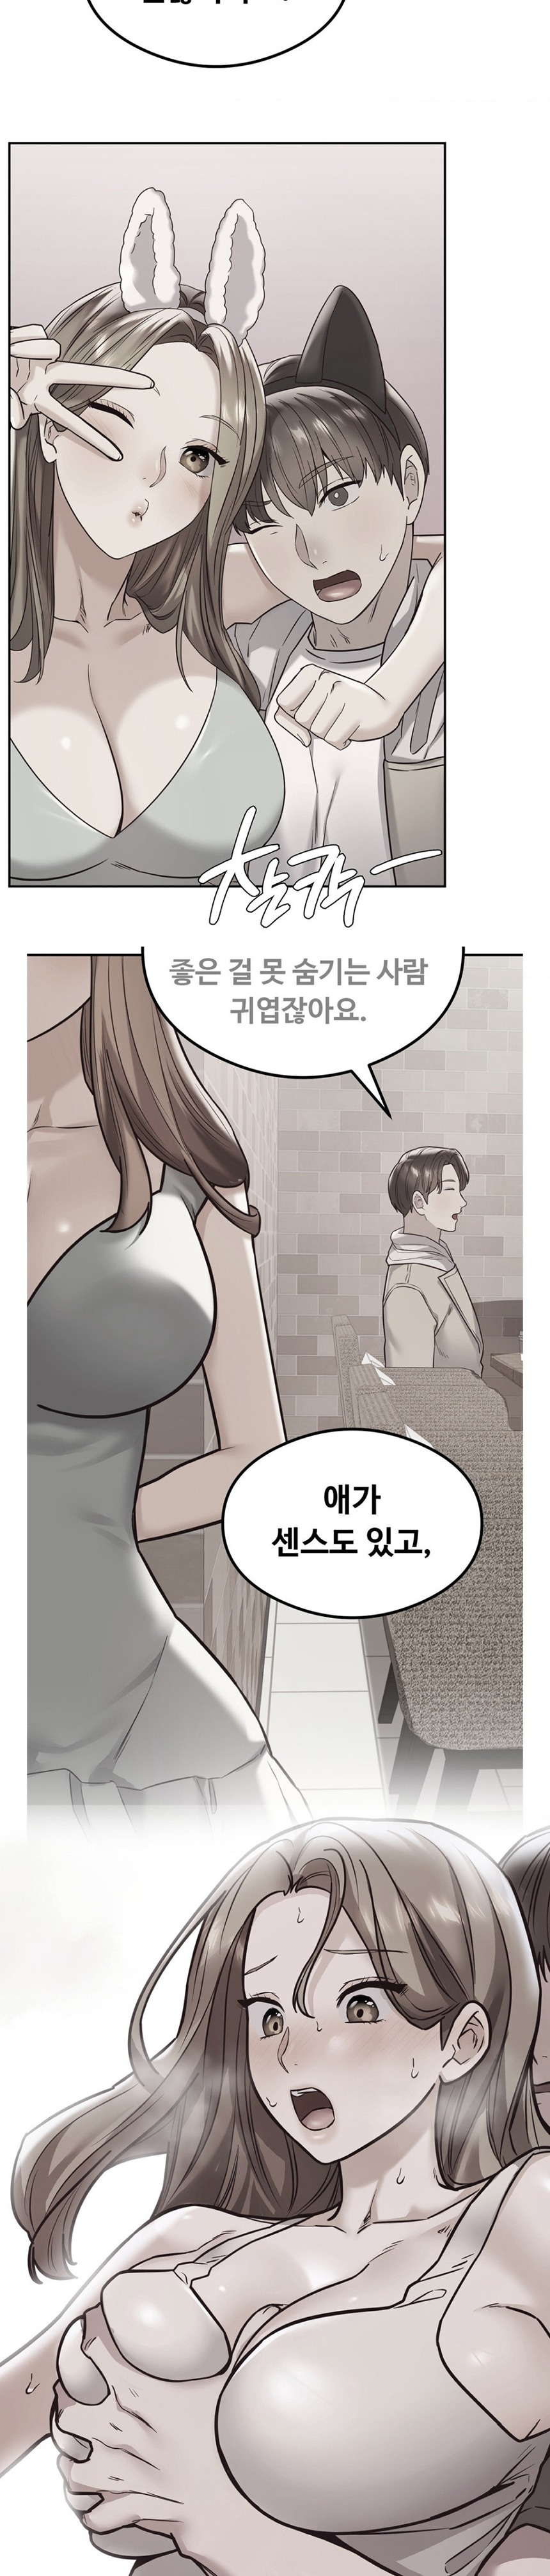 The Massage Club Raw - Chapter 21 Page 10